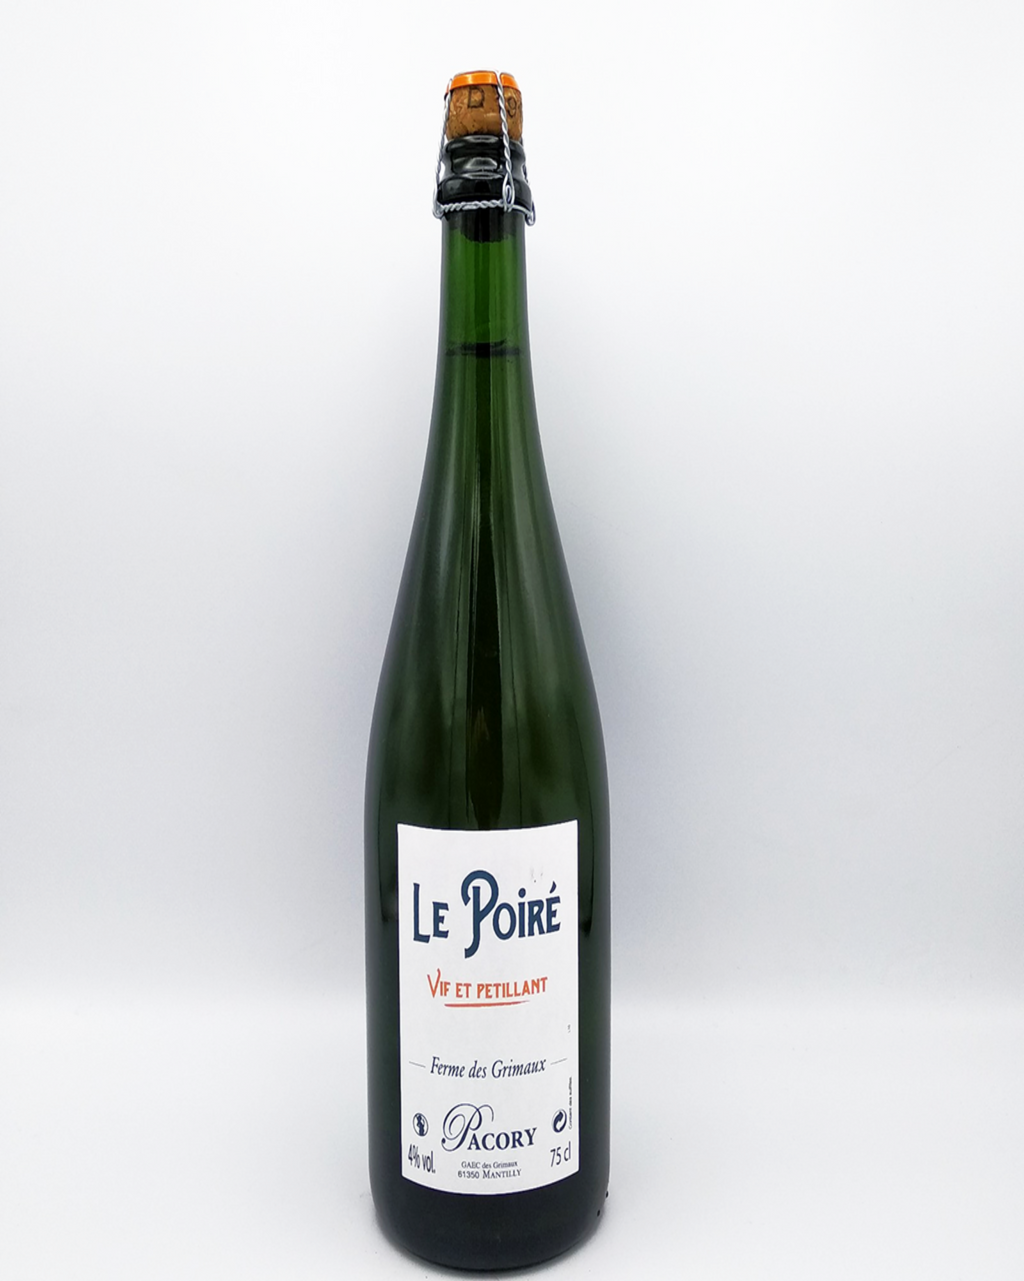 Perry "Live and Sparkling" 75cl - Pacory